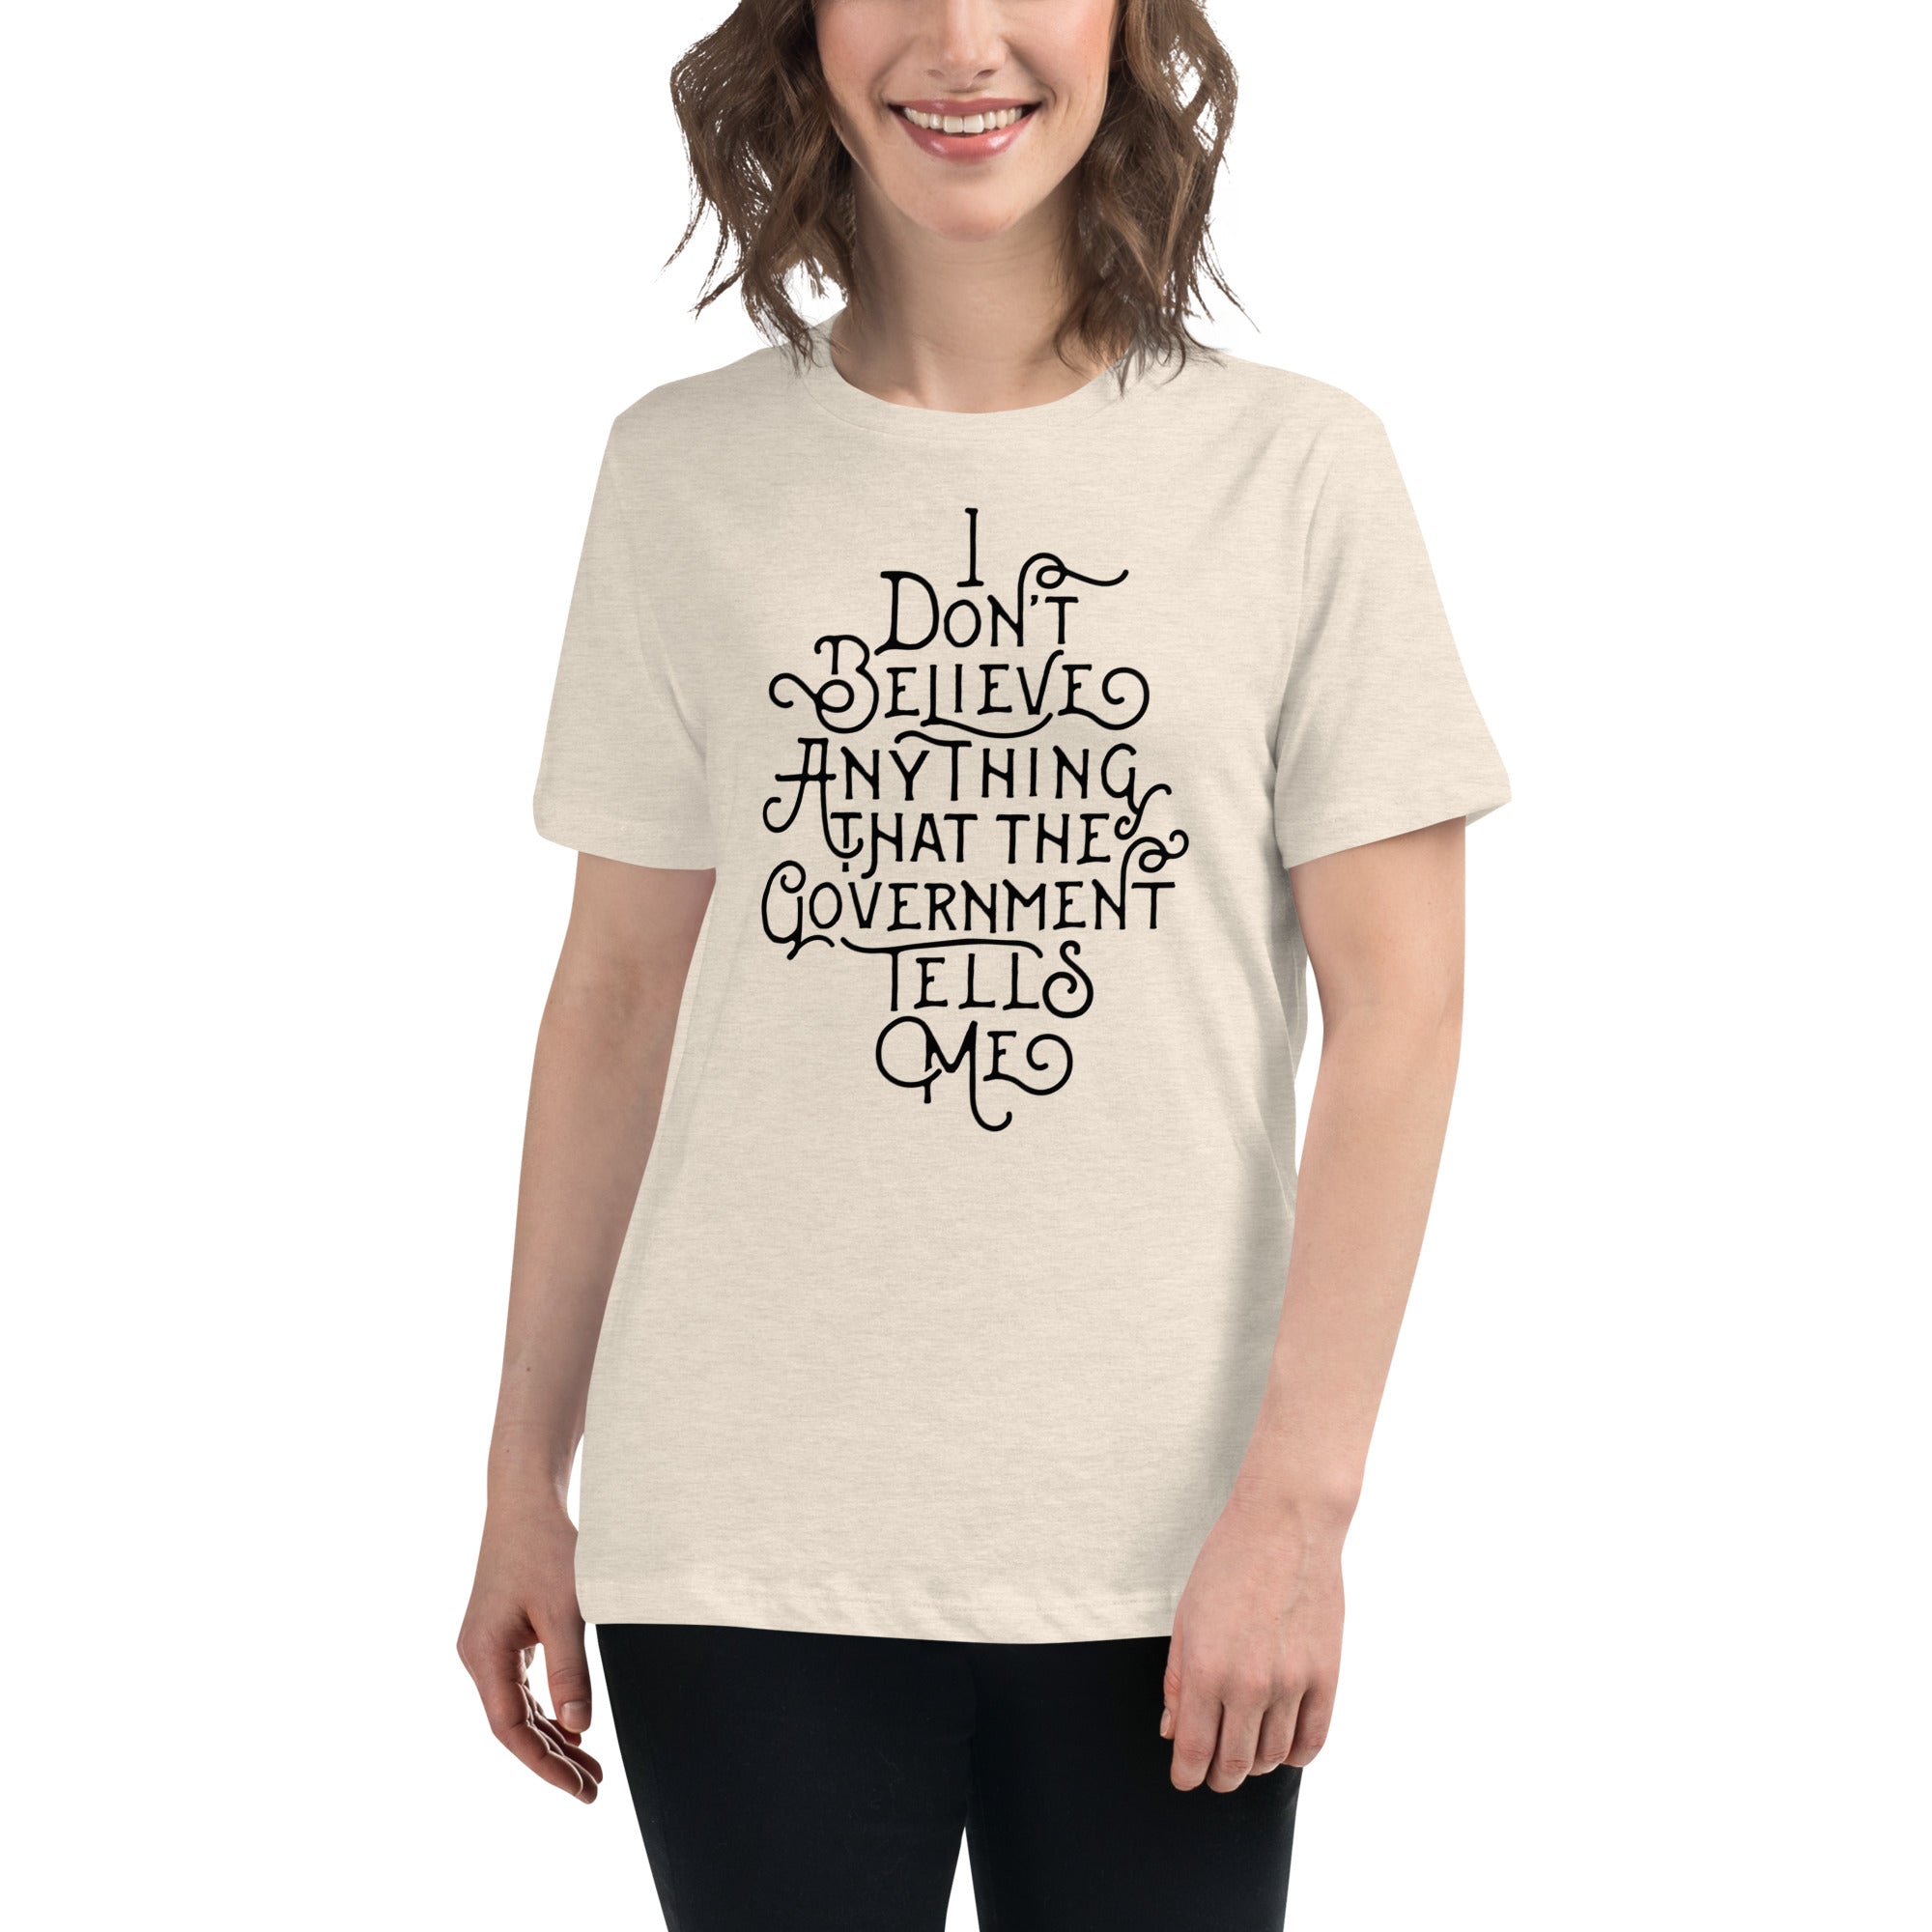 I Don't Believe anything the Government Tells Me Women's Relaxed T-Shirt